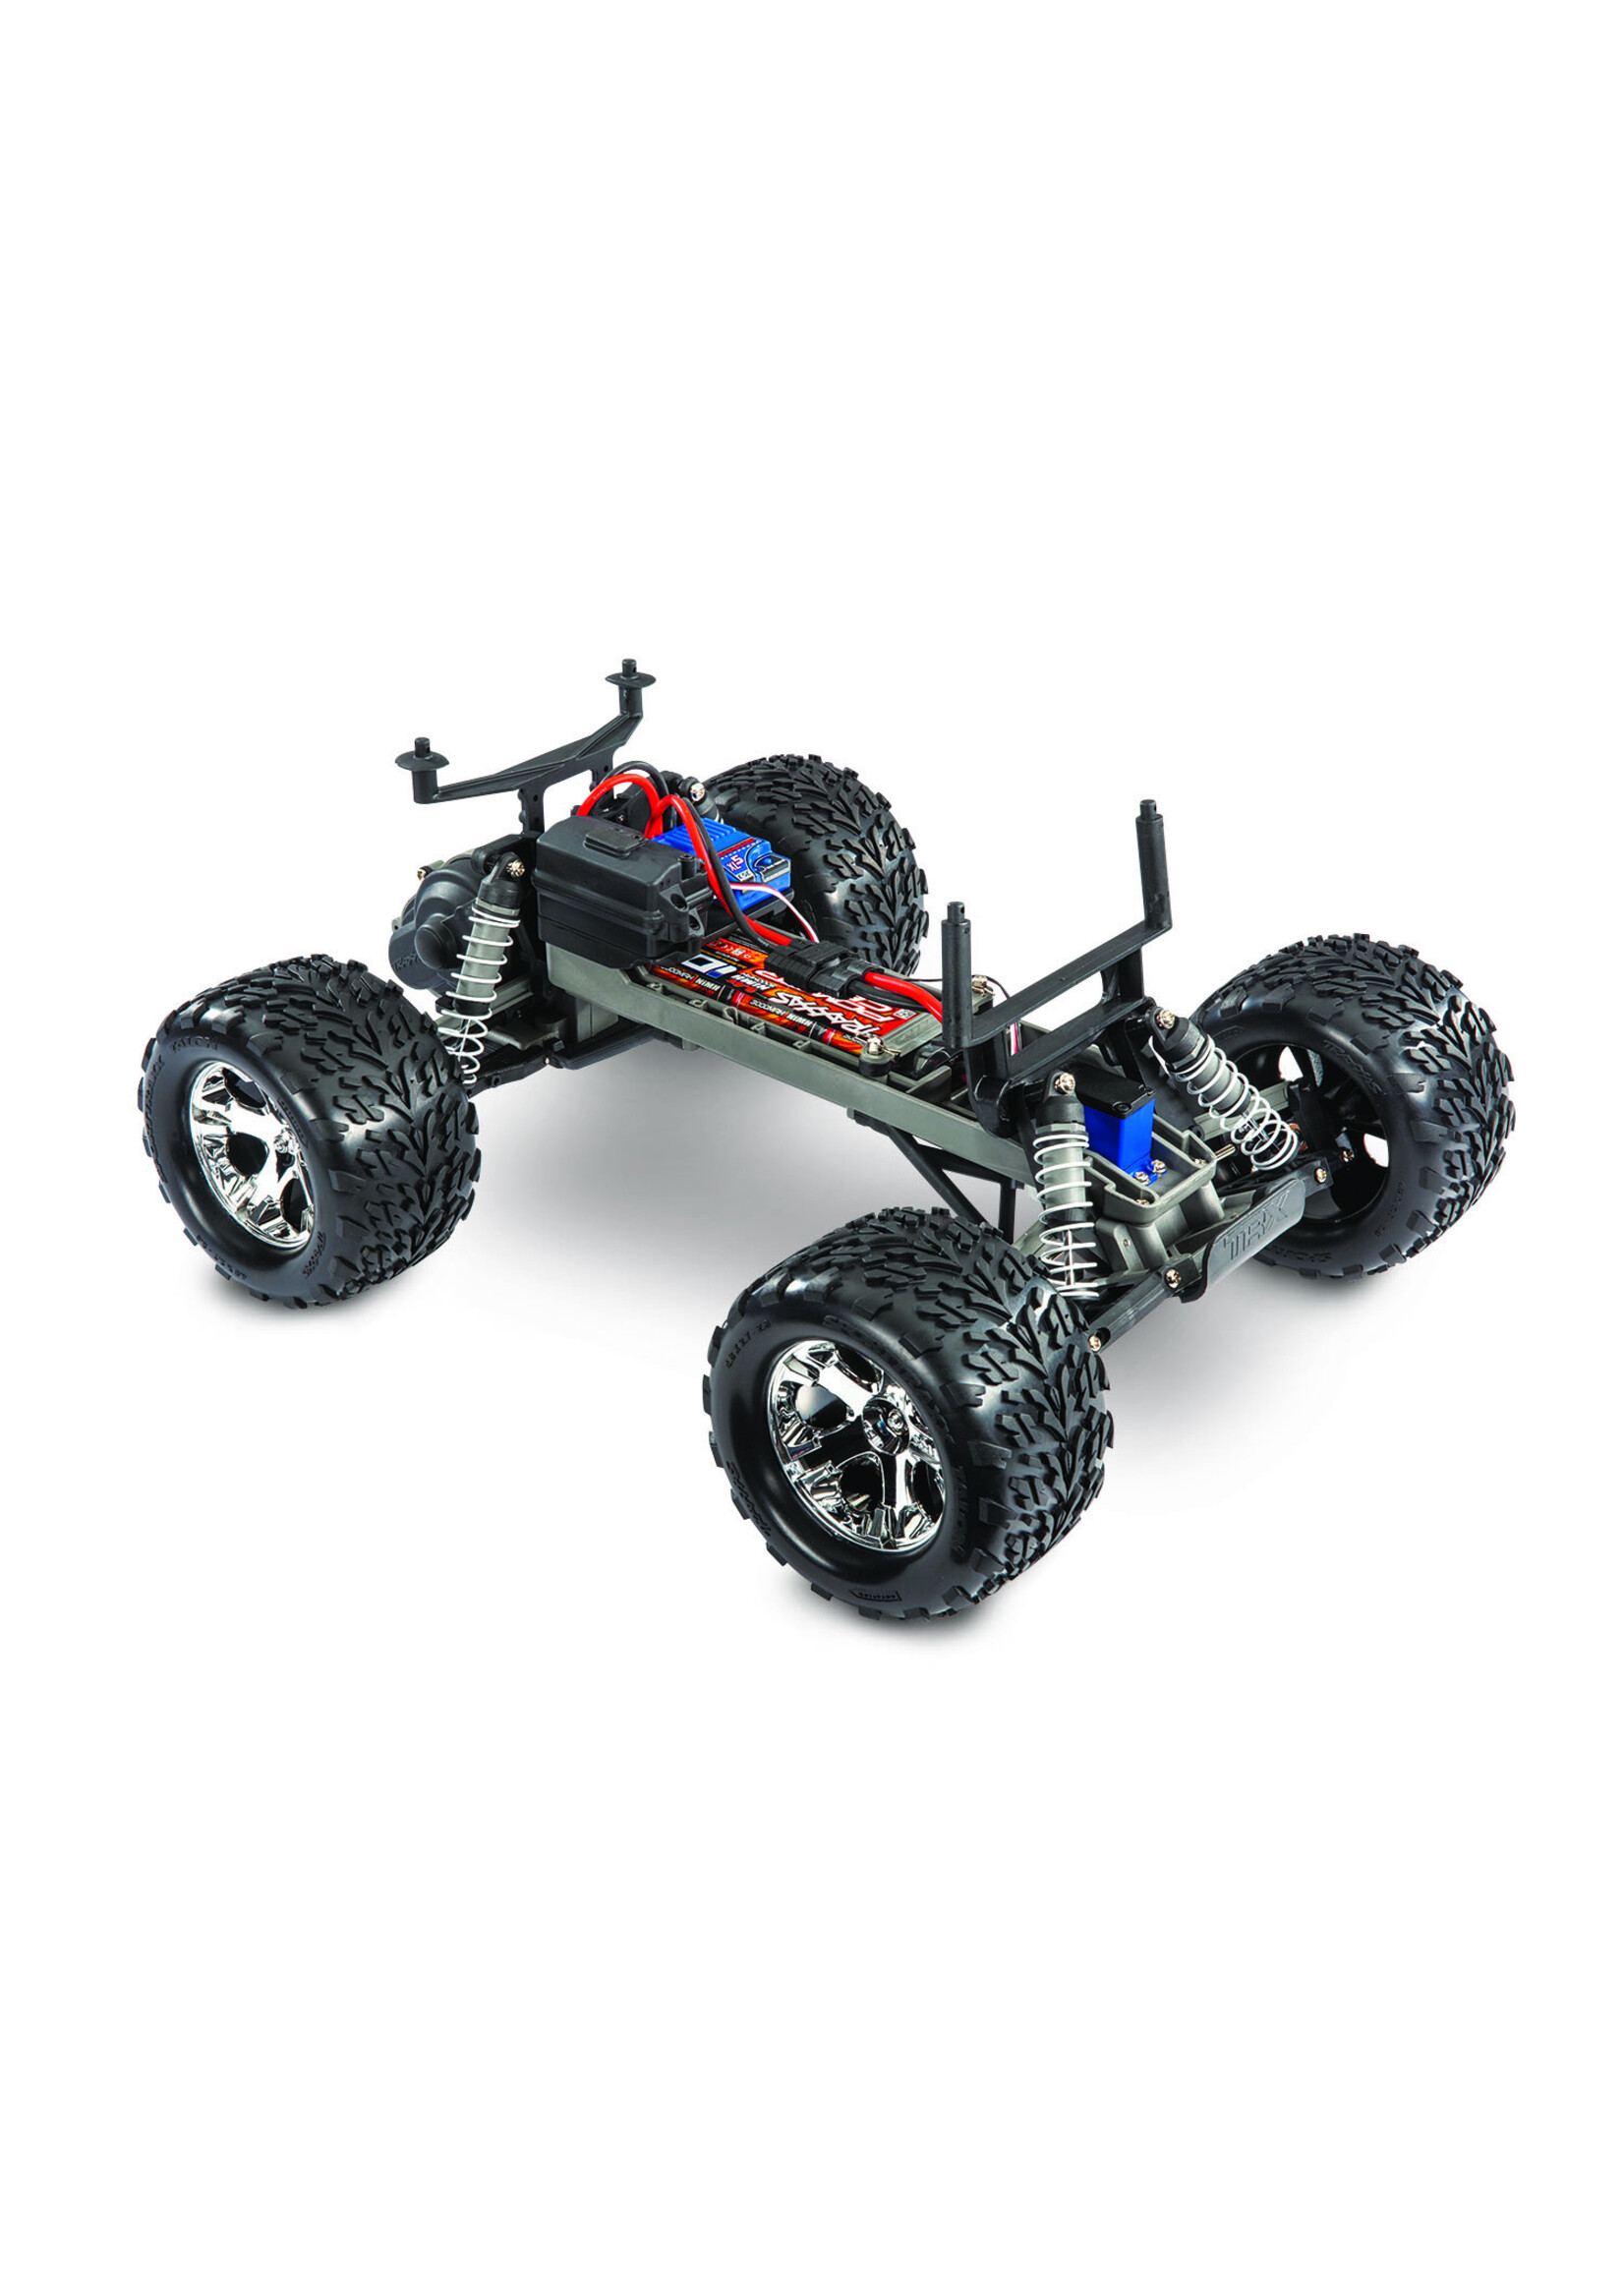 Traxxas 1/10 Stampede Monster Truck With USB-C Charger - Blue